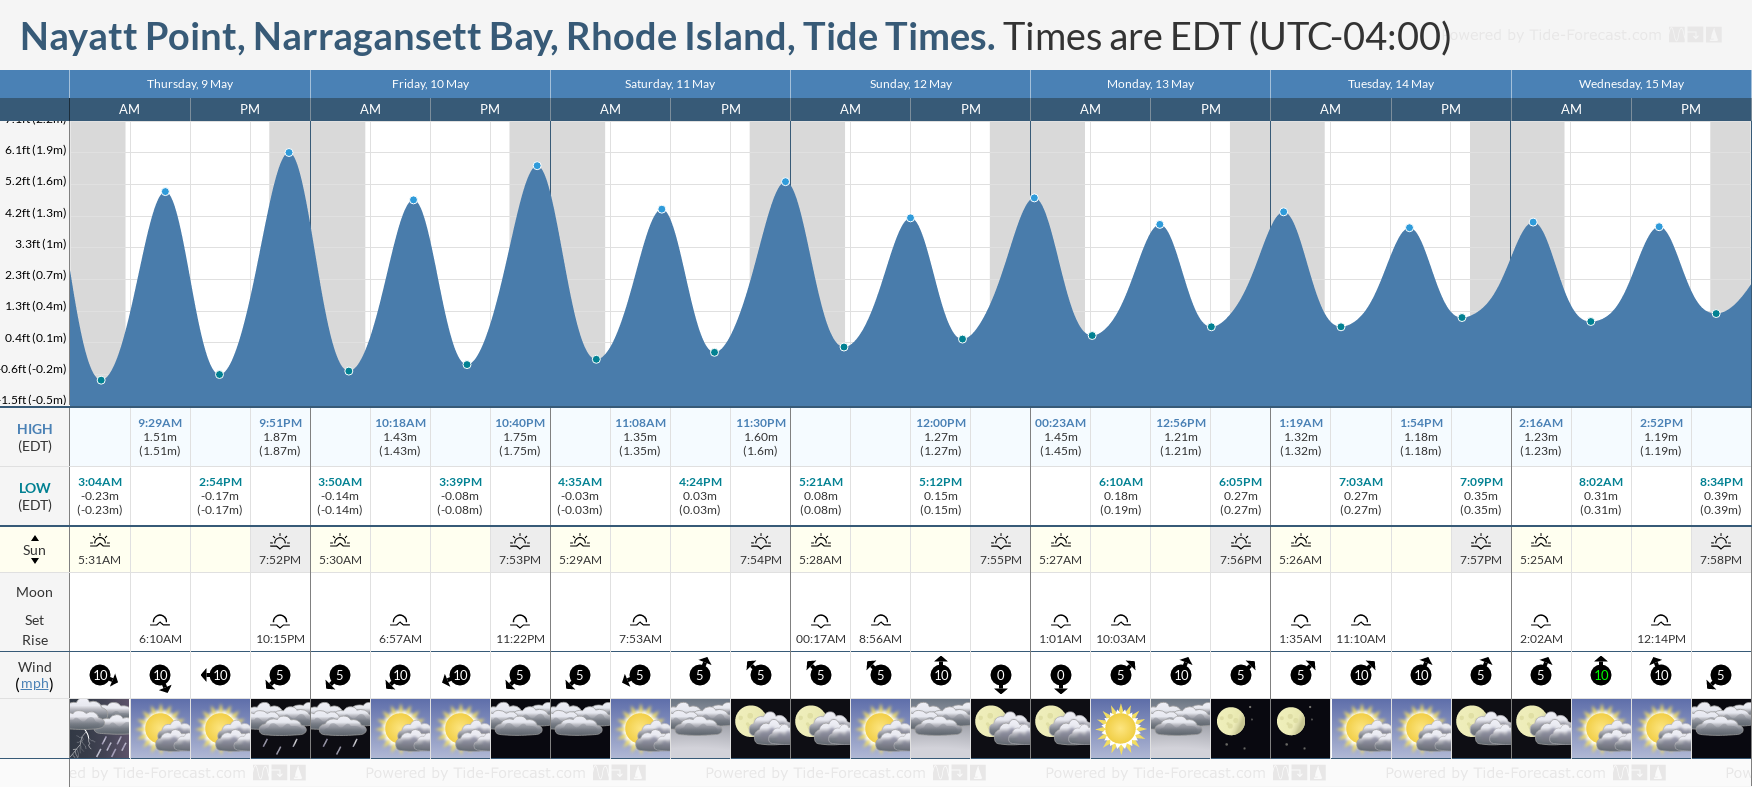 Nayatt Point, Narragansett Bay, Rhode Island Tide Chart including high and low tide tide times for the next 7 days